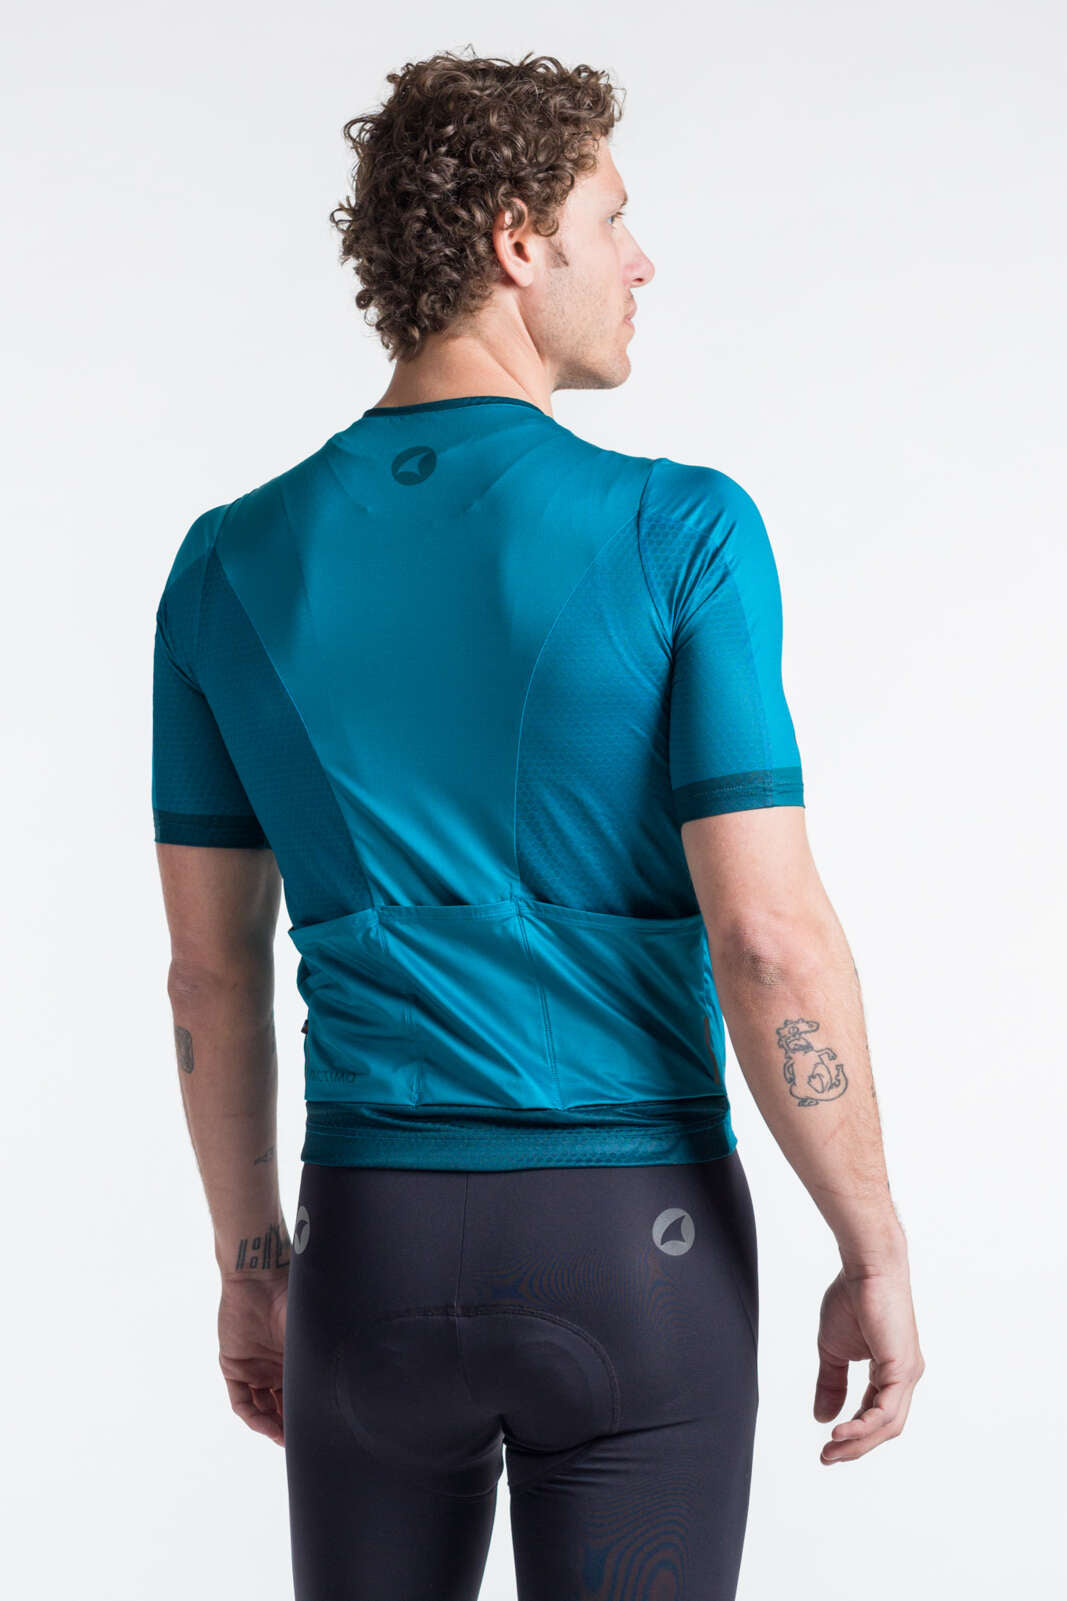 Men's Best Teal Cycling Jersey - Summit Back View